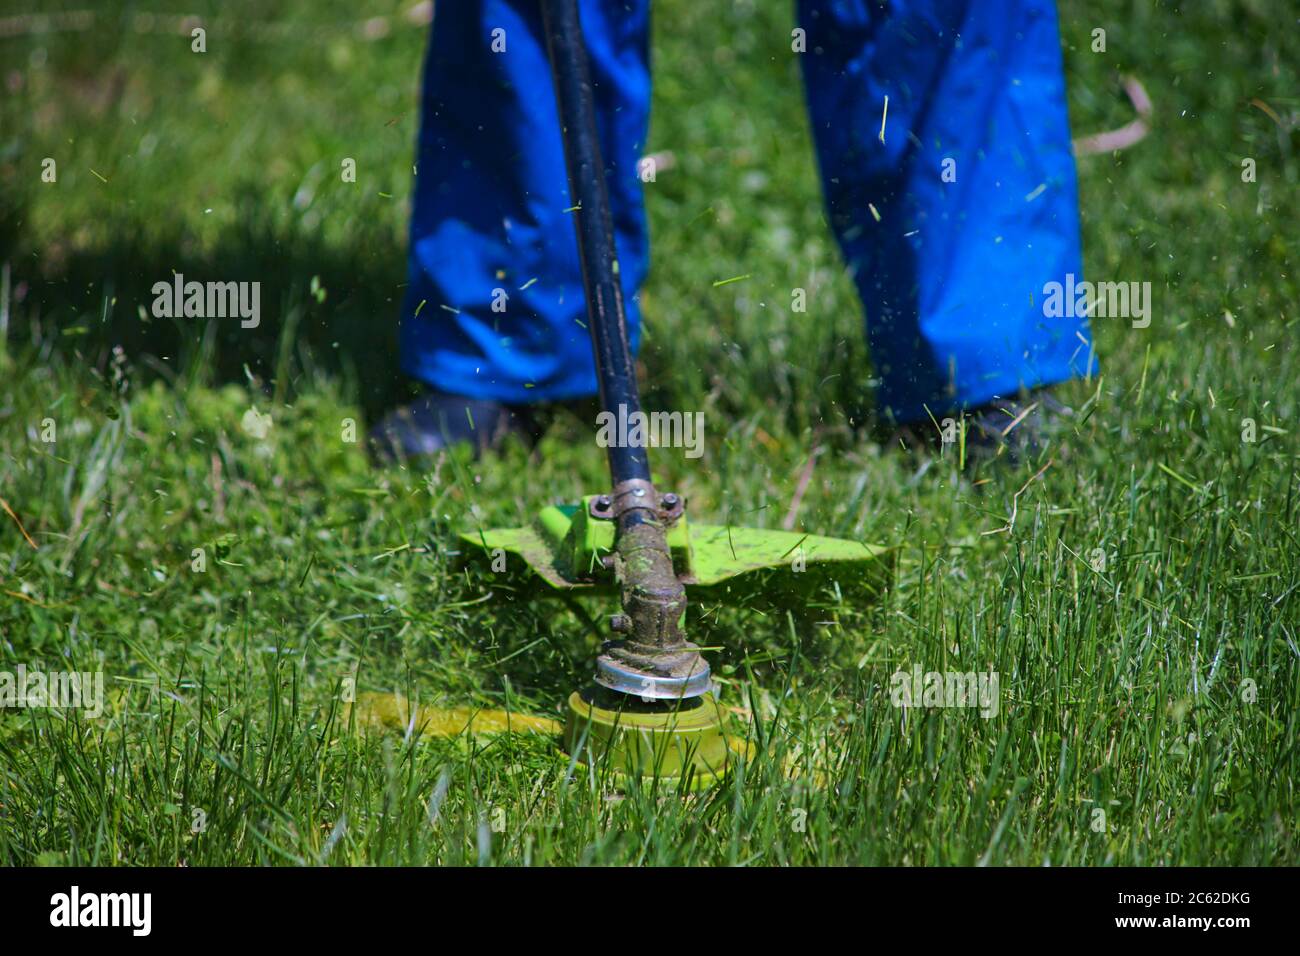 A man mows grass near his house with an electric mower Stock Photo